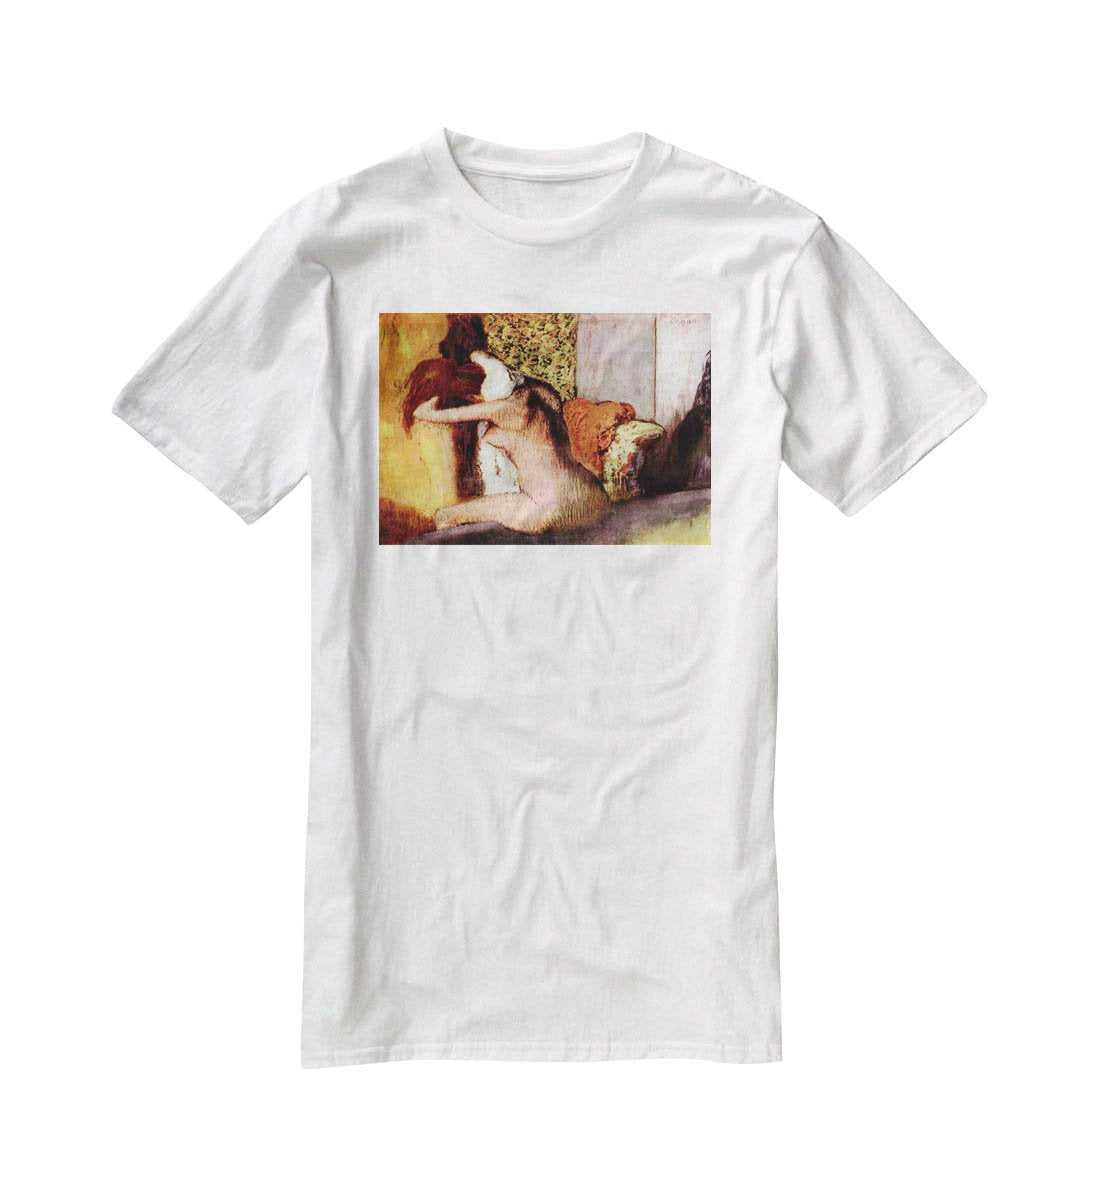 After bathing 2 by Degas T-Shirt - Canvas Art Rocks - 5